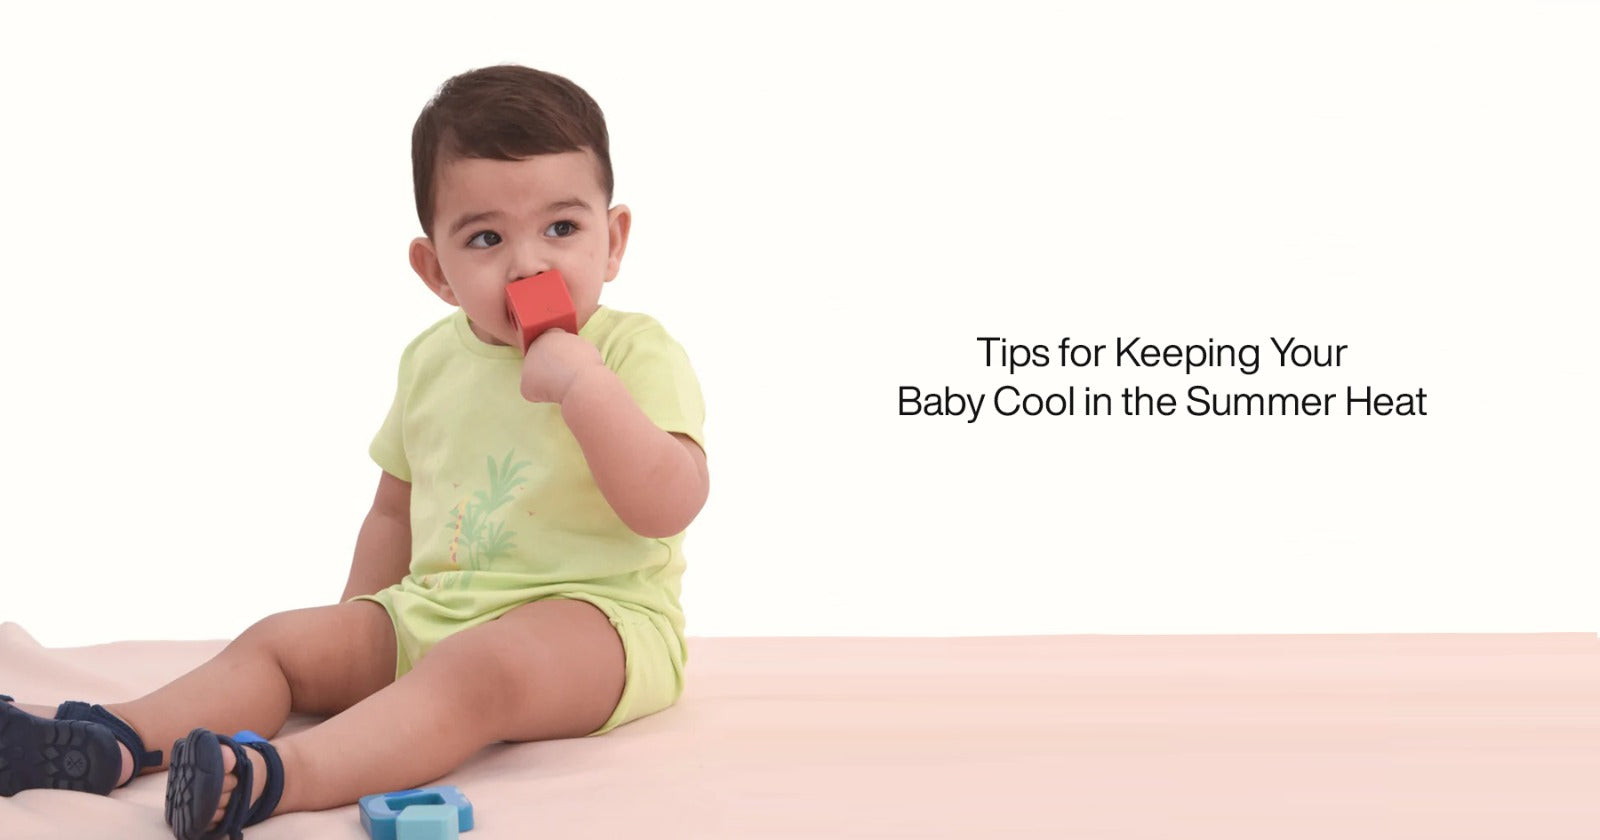 Tips for Keeping Your Baby Cool in the Summer Heat